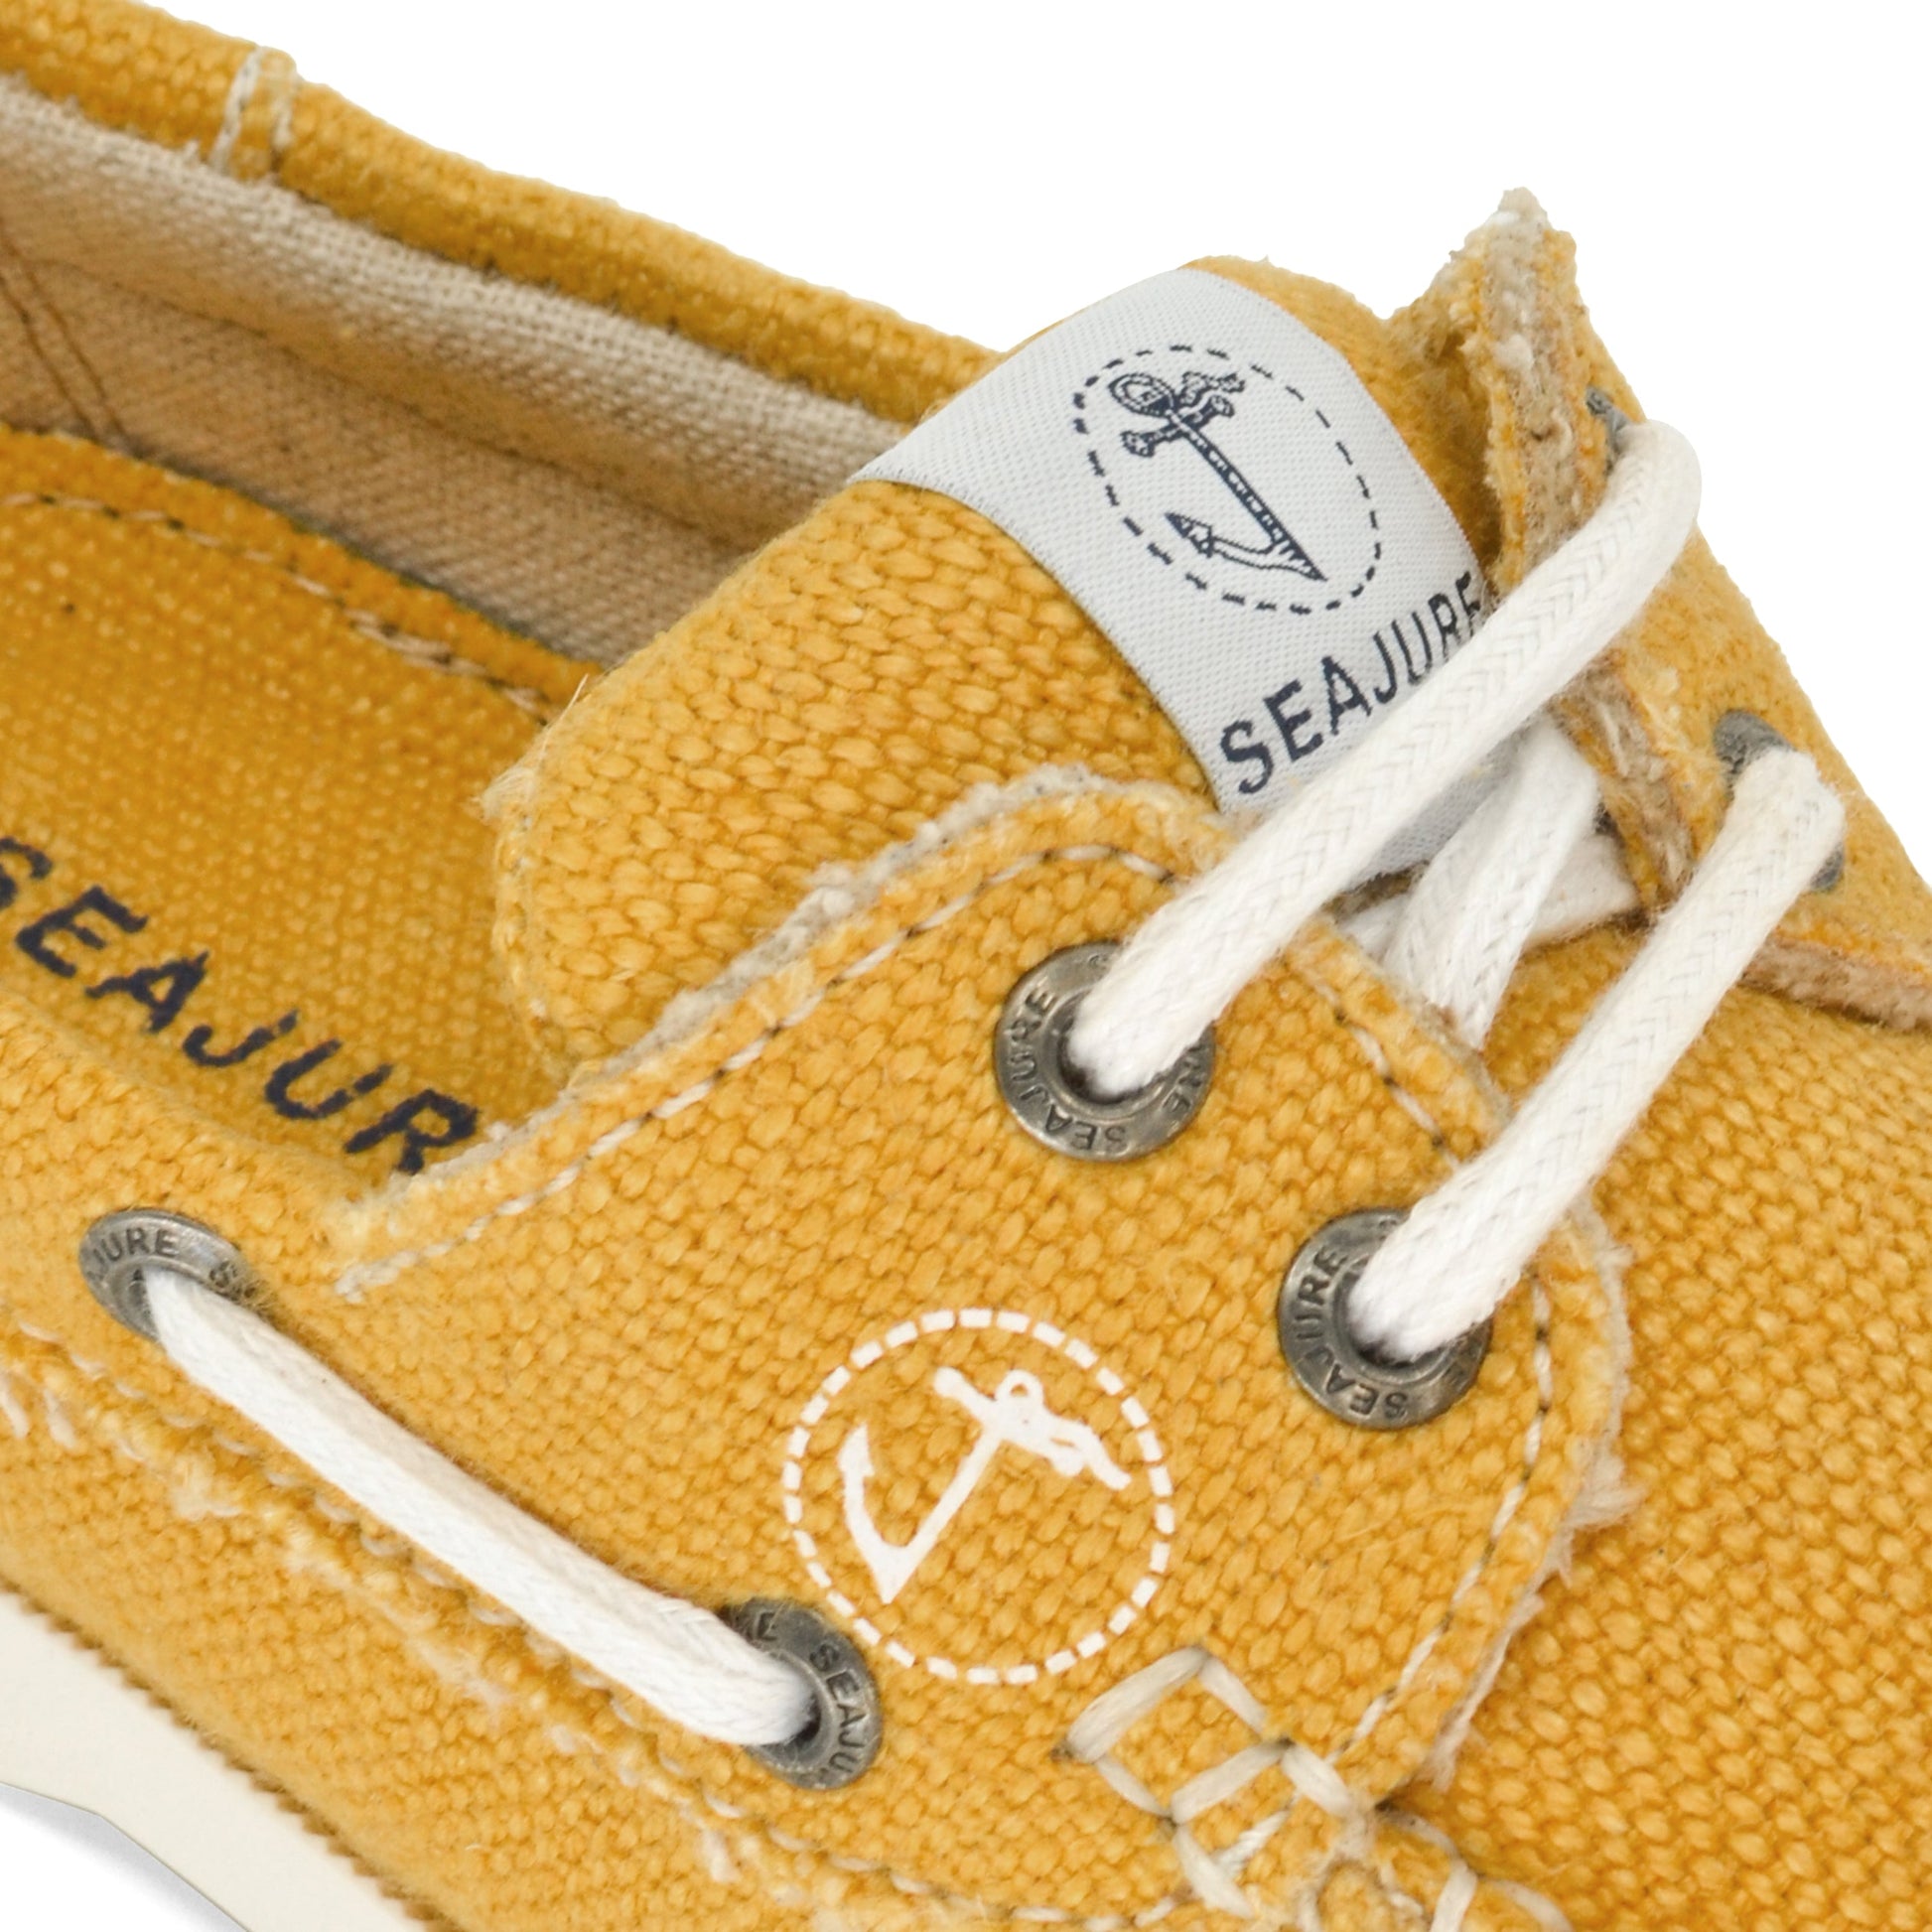 Close-up of a yellow canvas boat shoe with white laces. The shoe features a label with an anchor and the word "AMETHYST HESTIA" along with stitching and metal eyelets, embodying sustainability as part of the Amethyst Hestia Women Hemp & Vegan Boat Shoe Saharun collection.